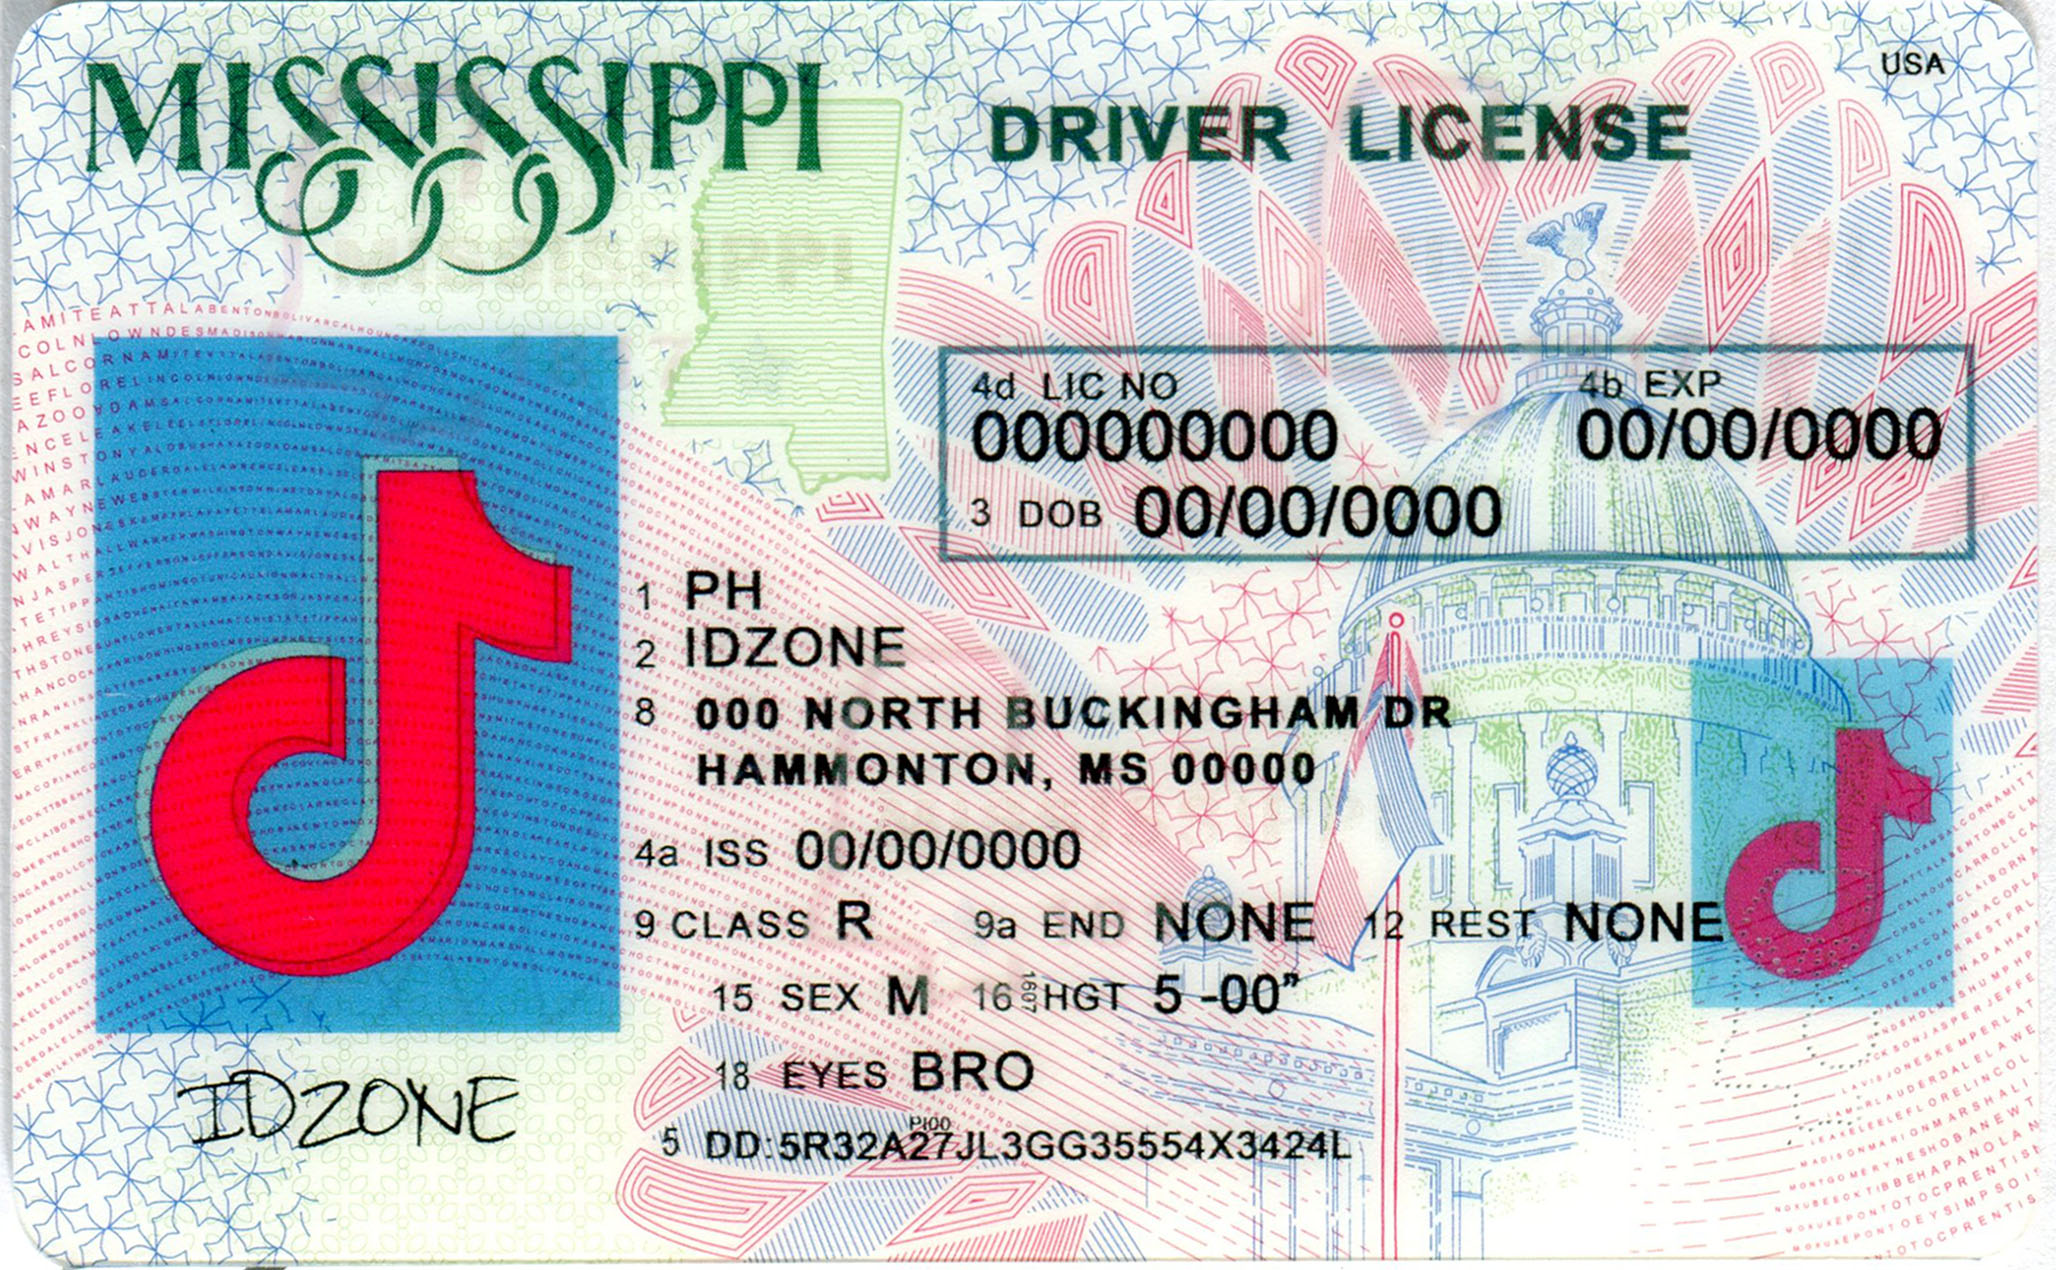 MISSISSIPPI-New Scannable fake id